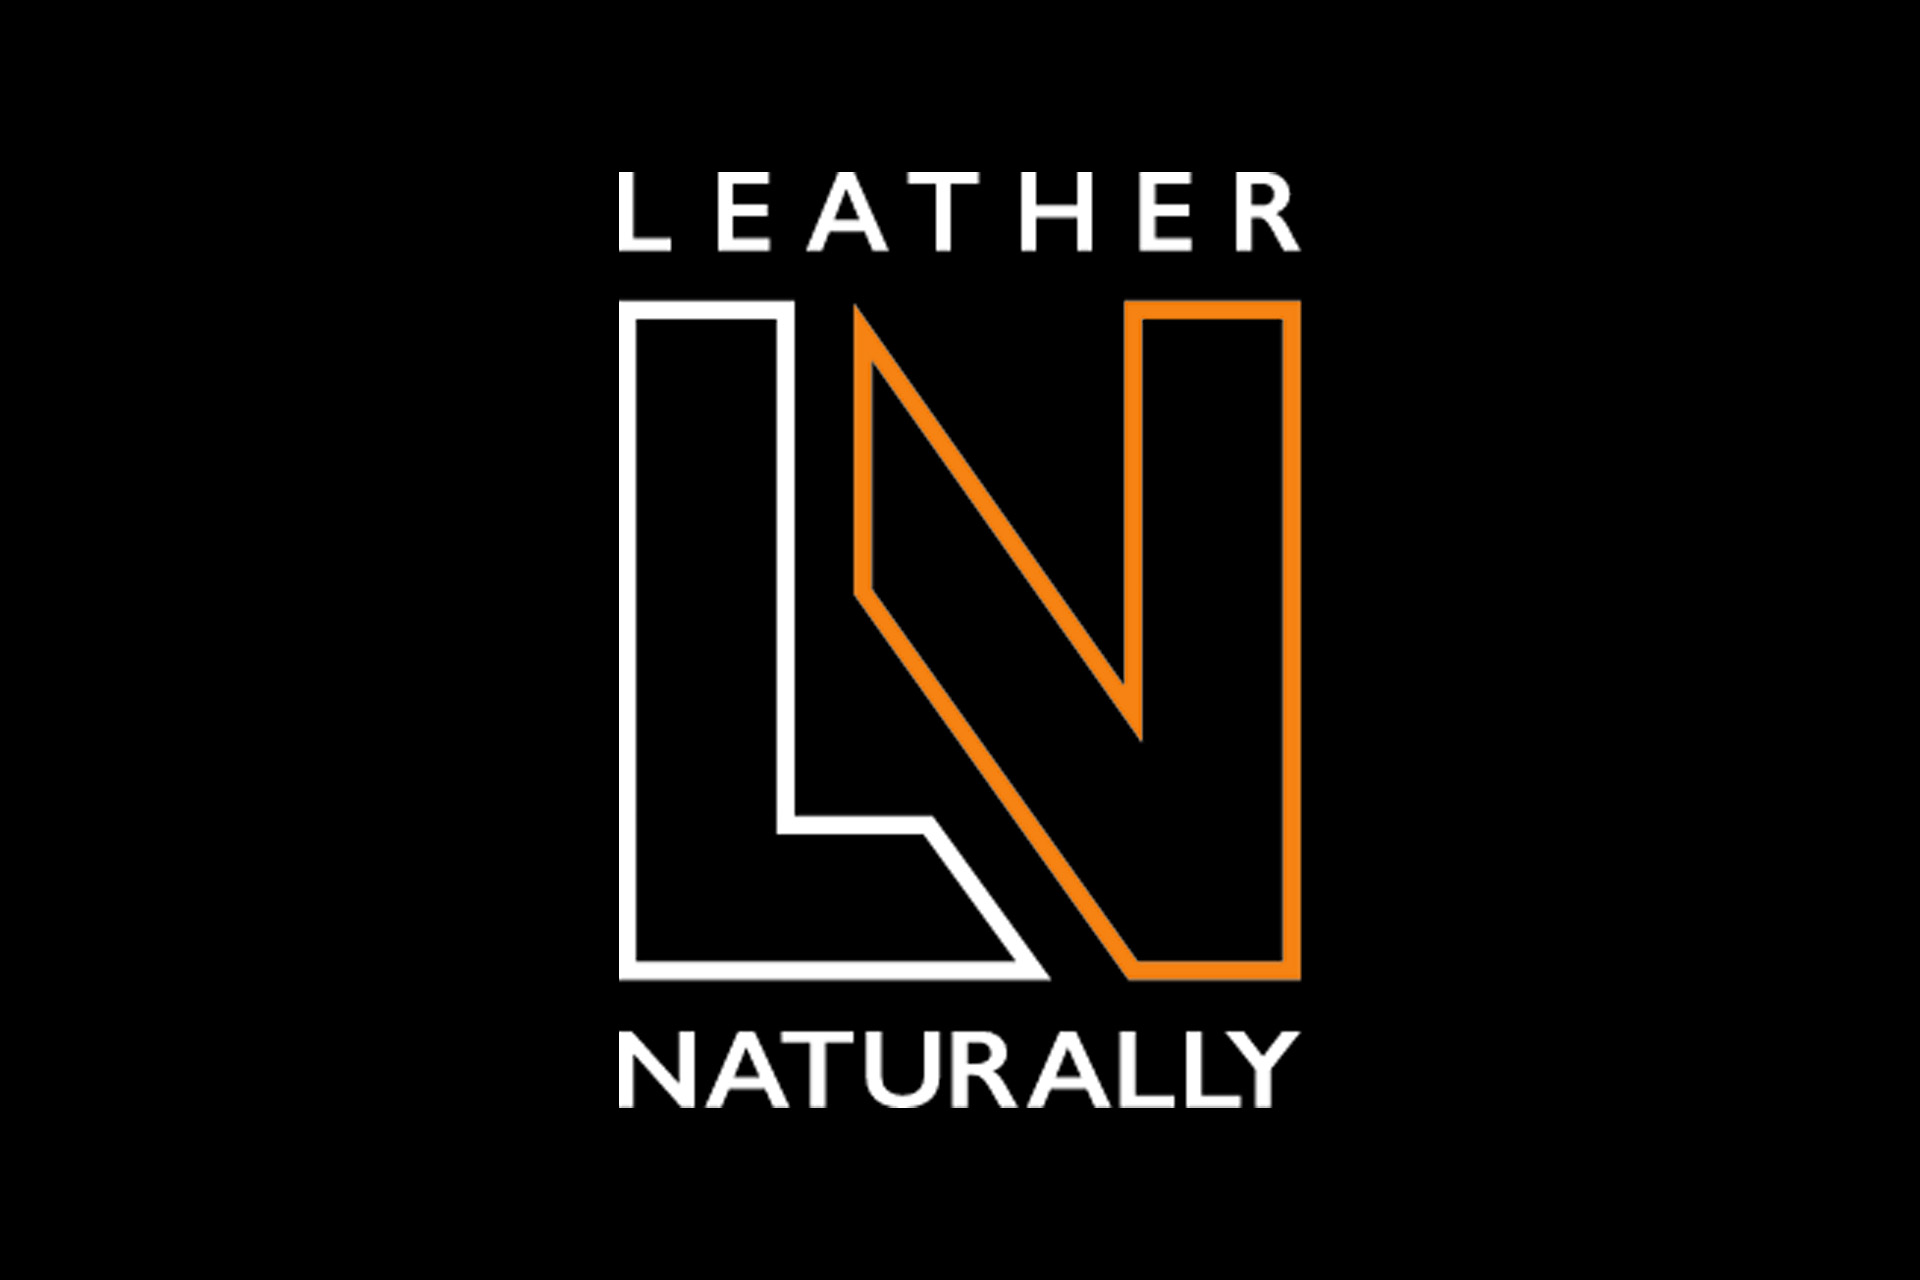 What is the Leather Working Group certification, and does it make